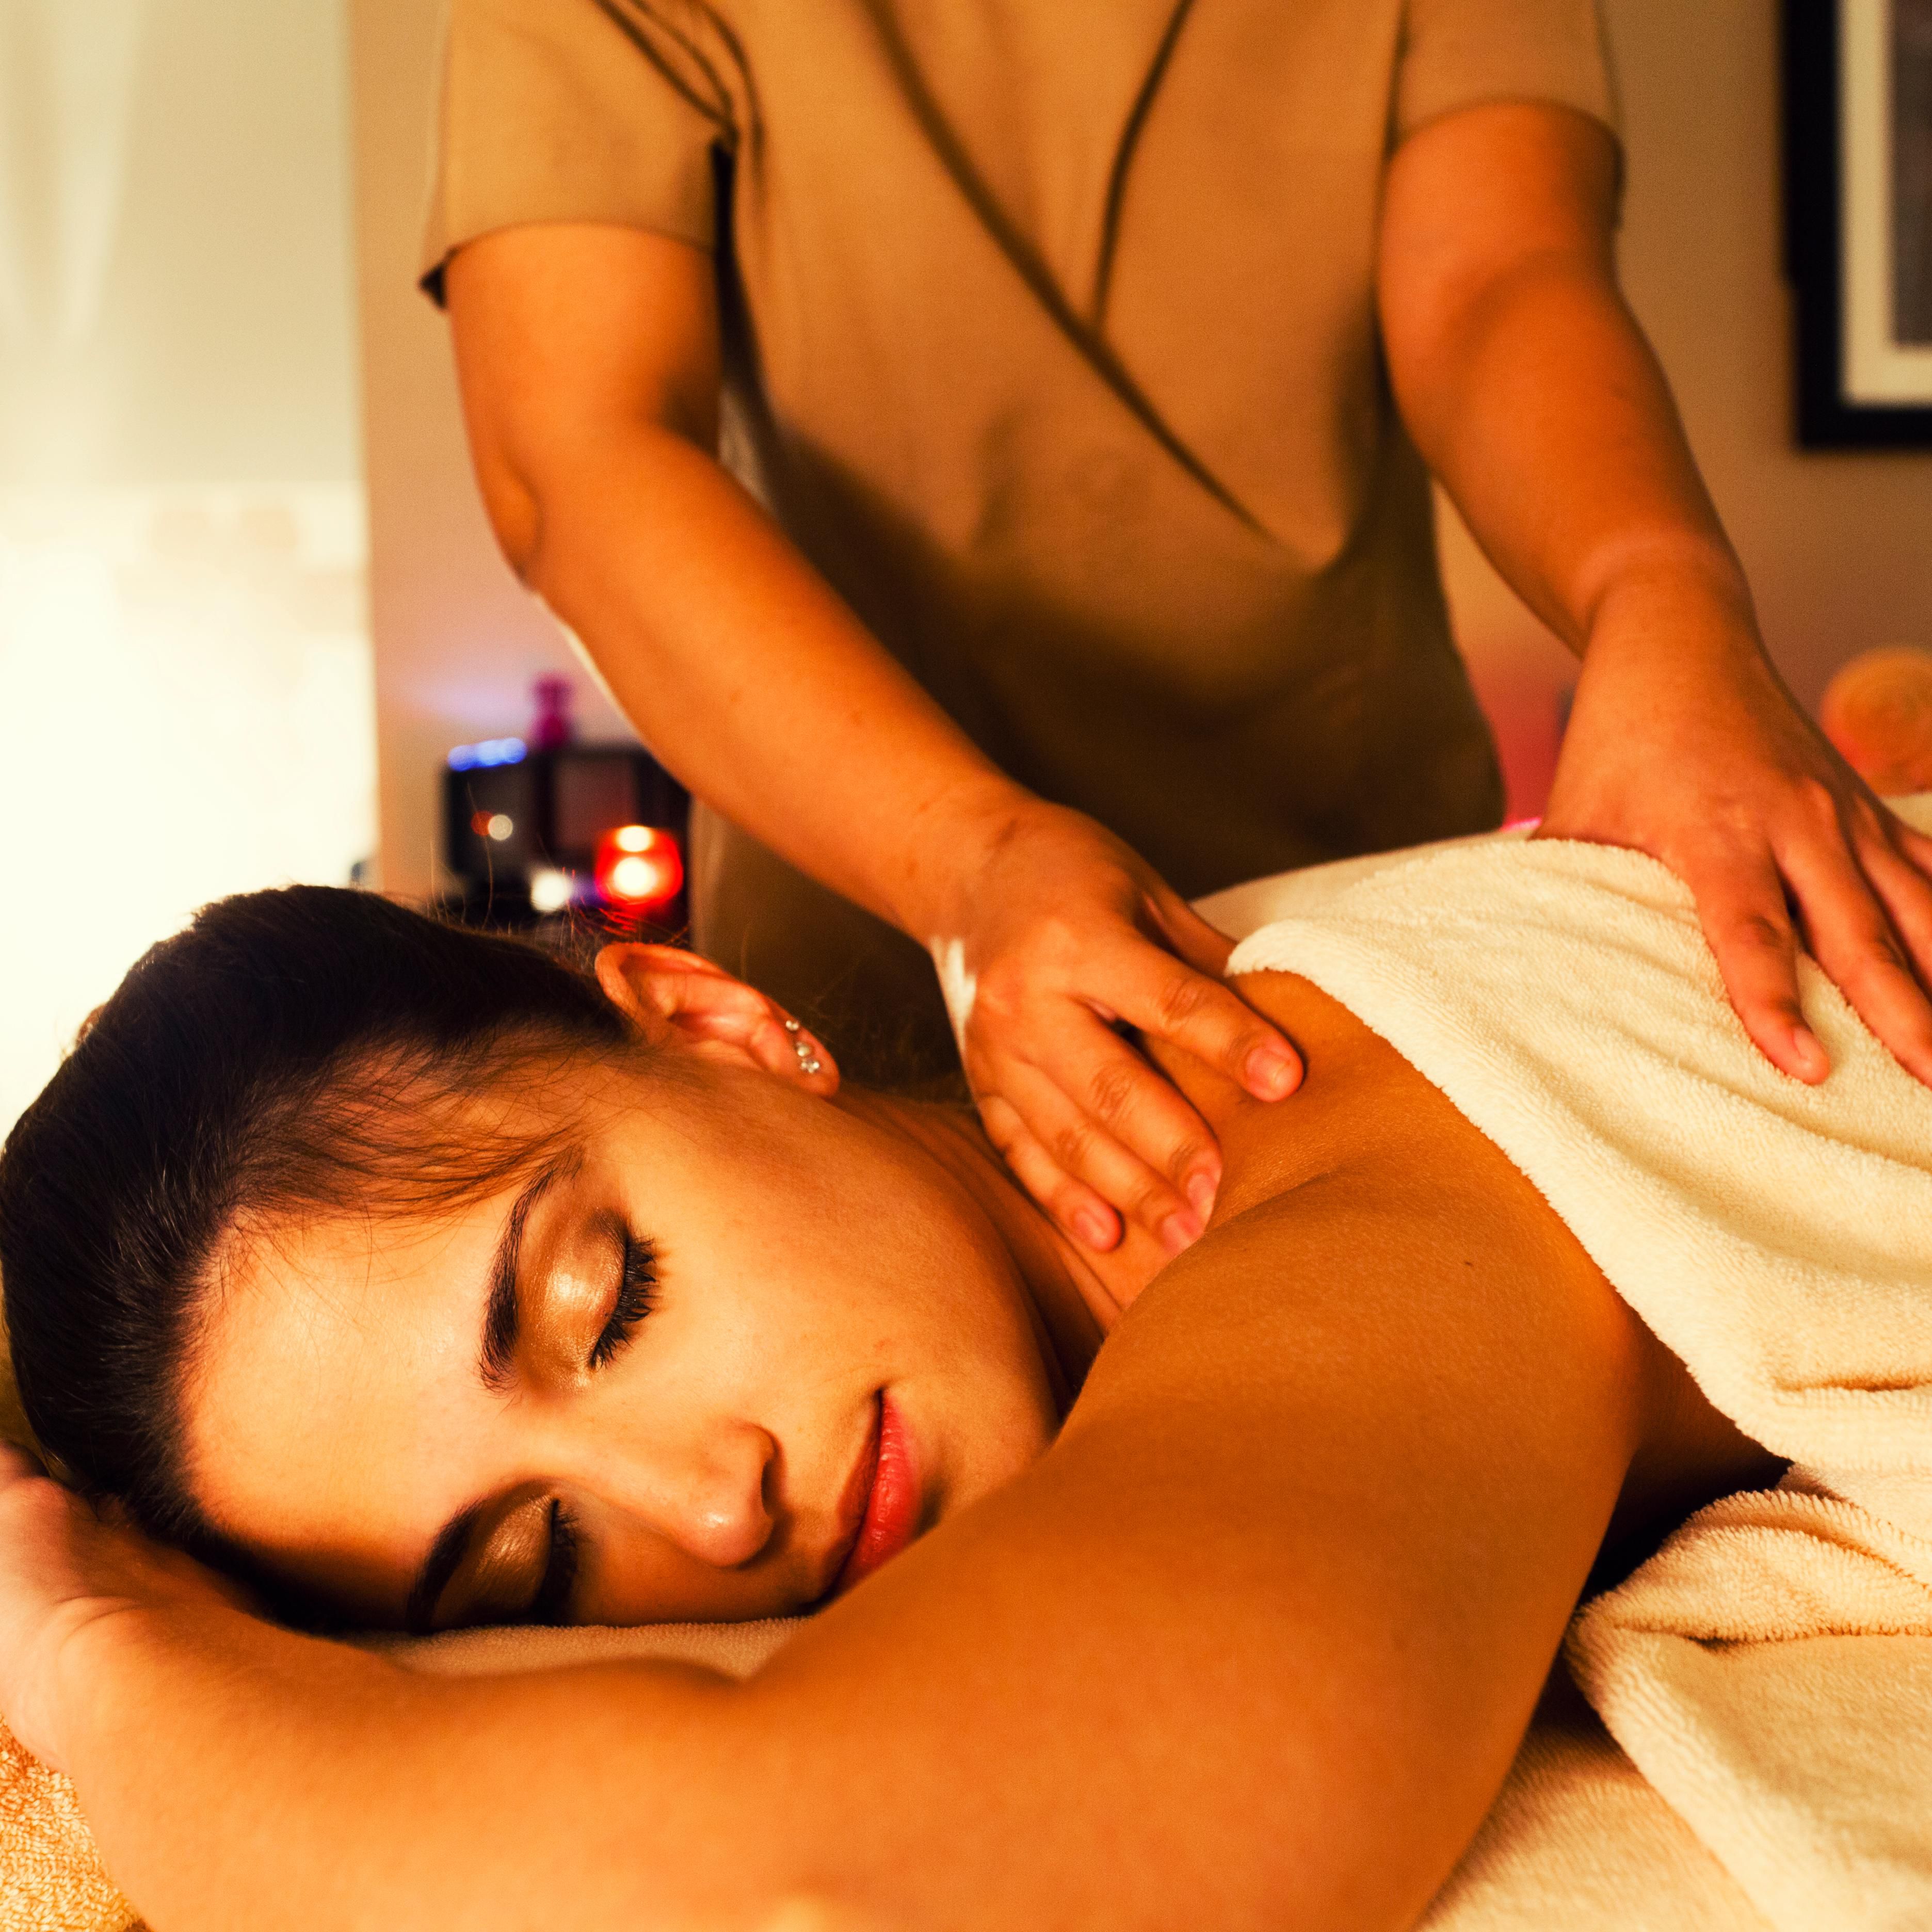 Choose to relax at Senses Massage Center